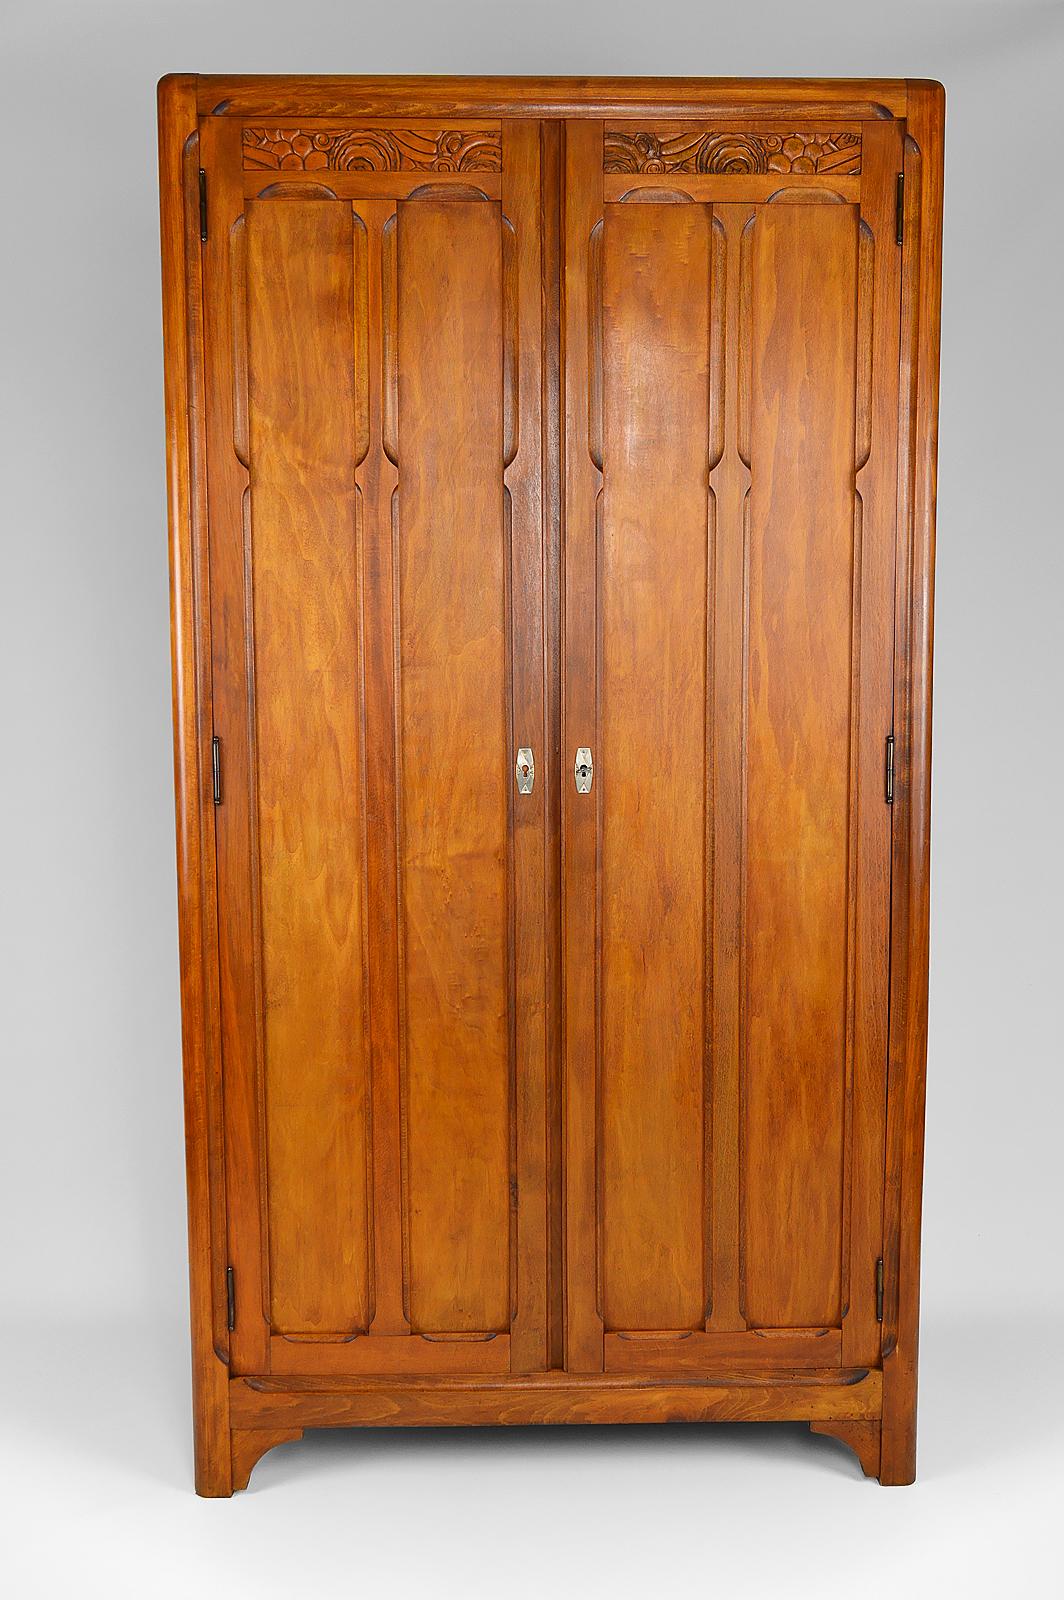 French Art Deco Wardrobe in Carved Wood, France, circa 1930